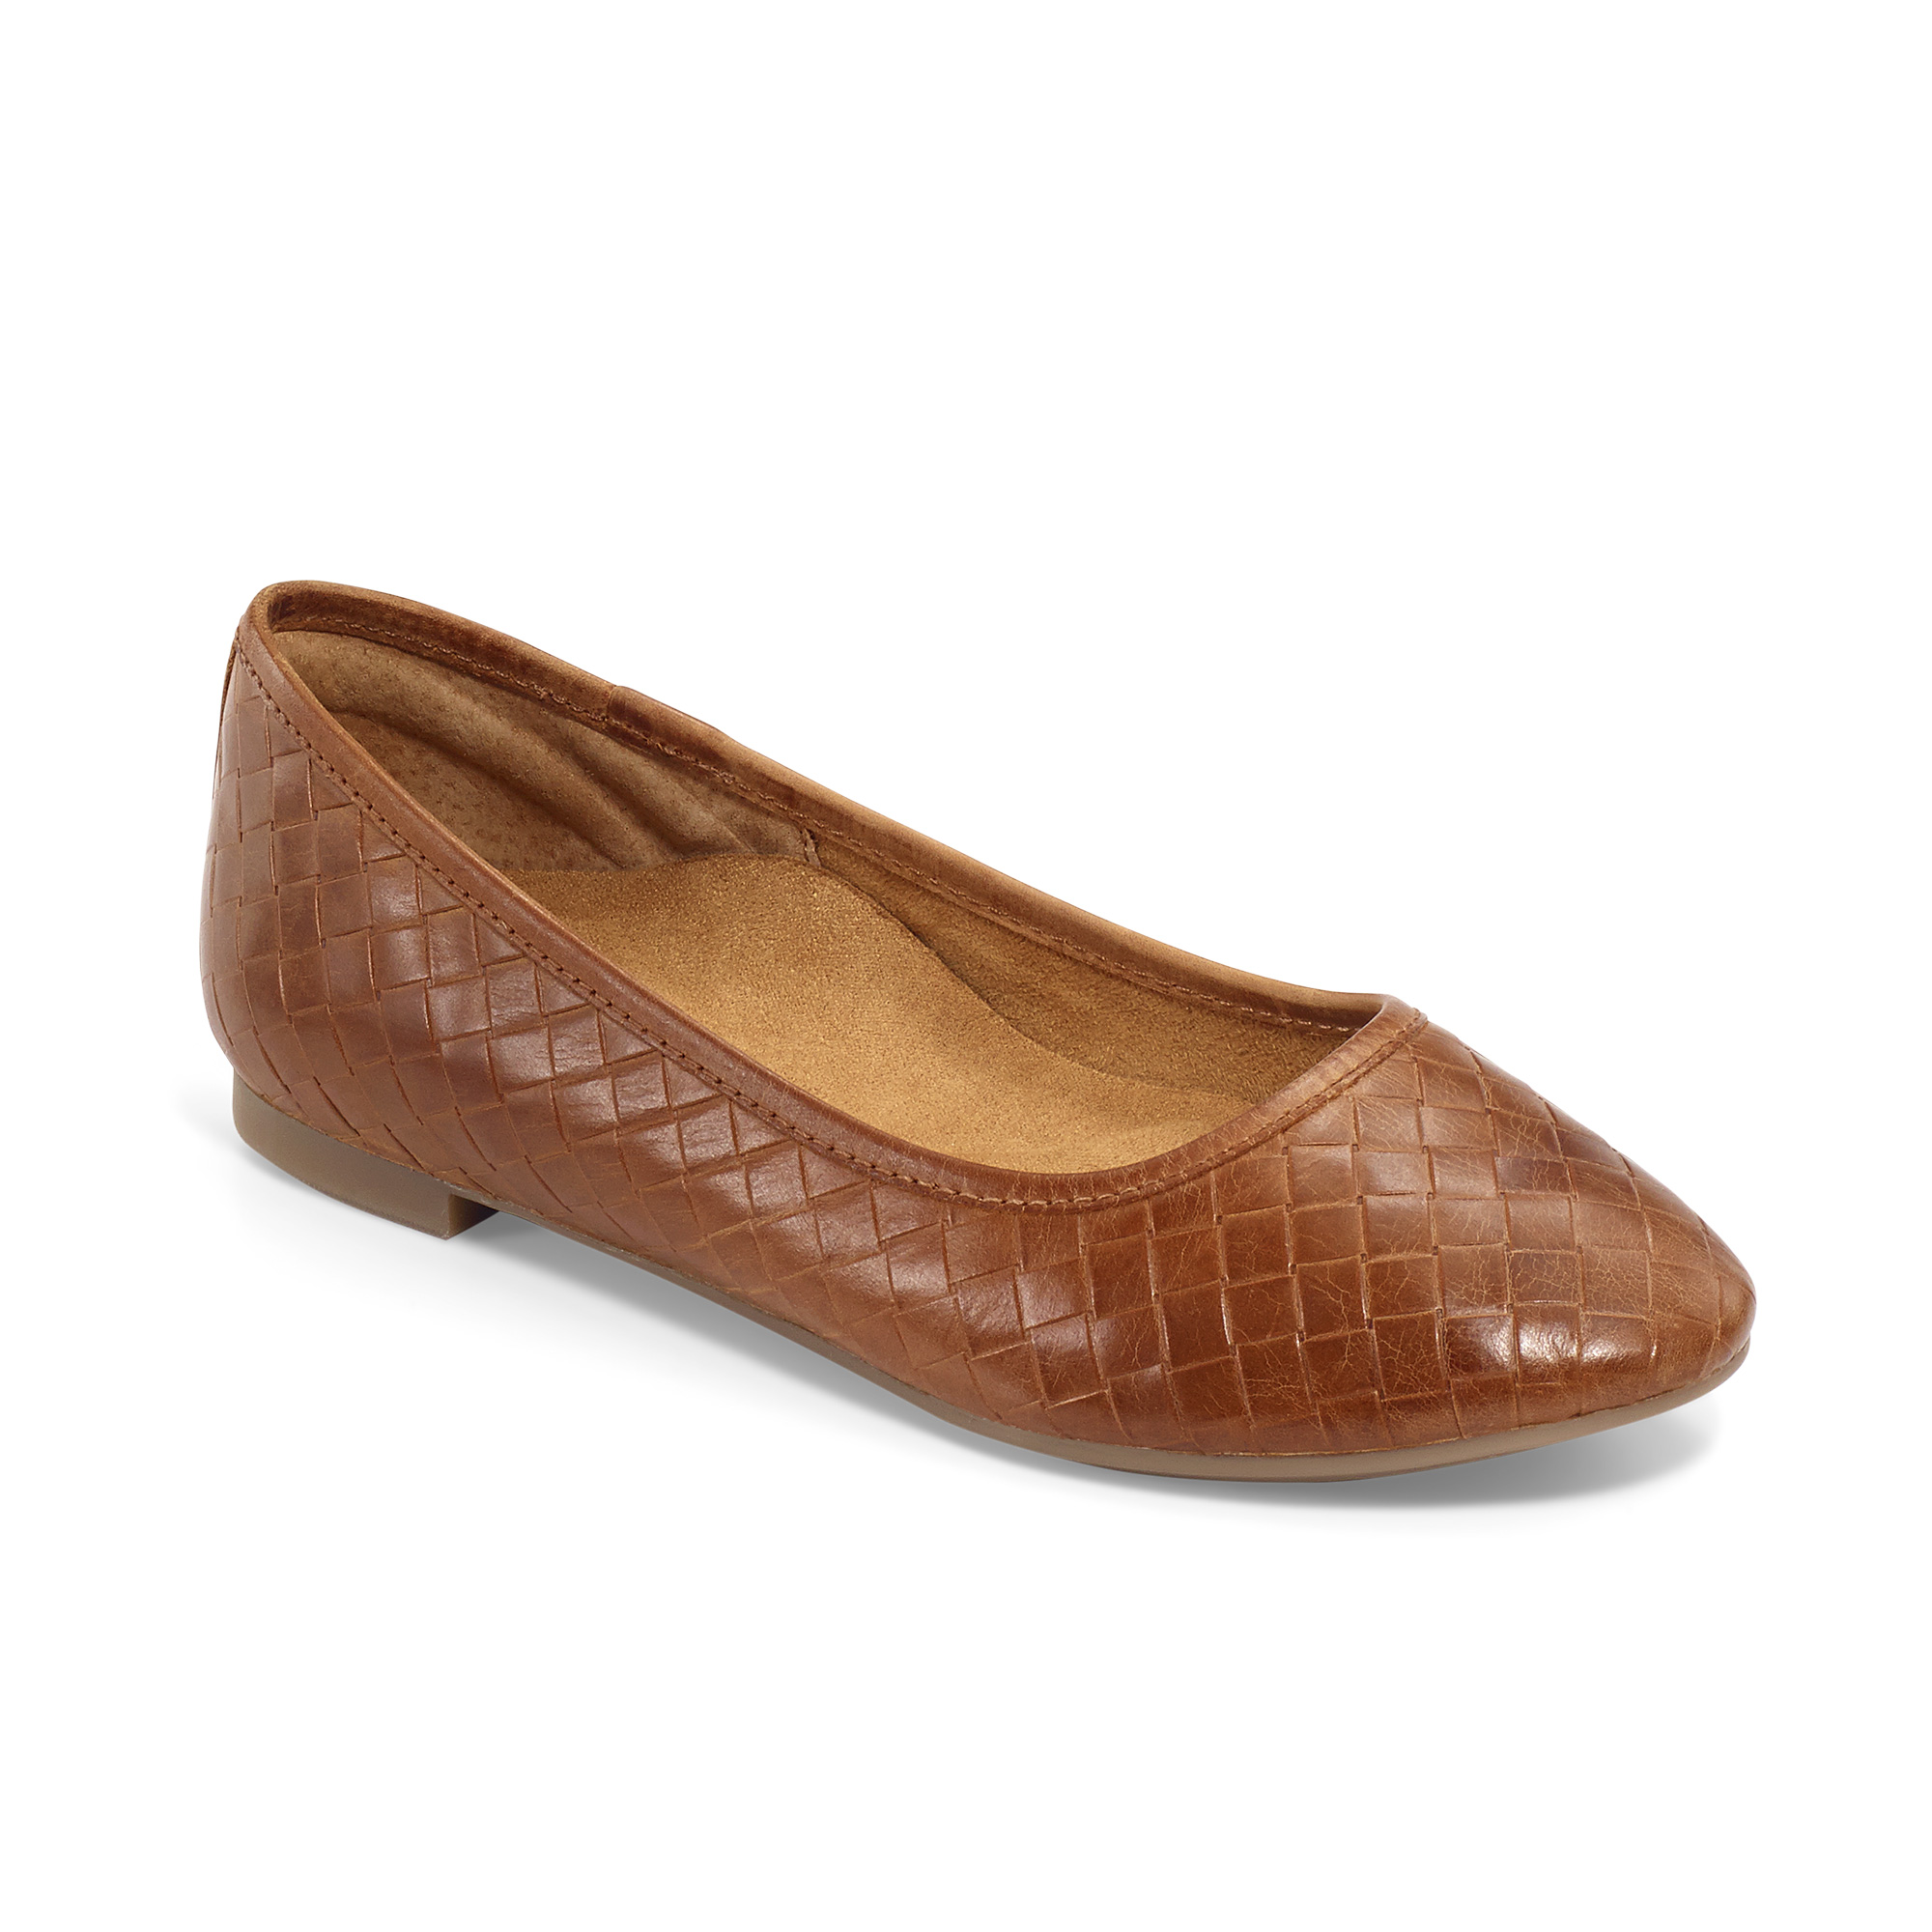 narrow ballet flats with arch support